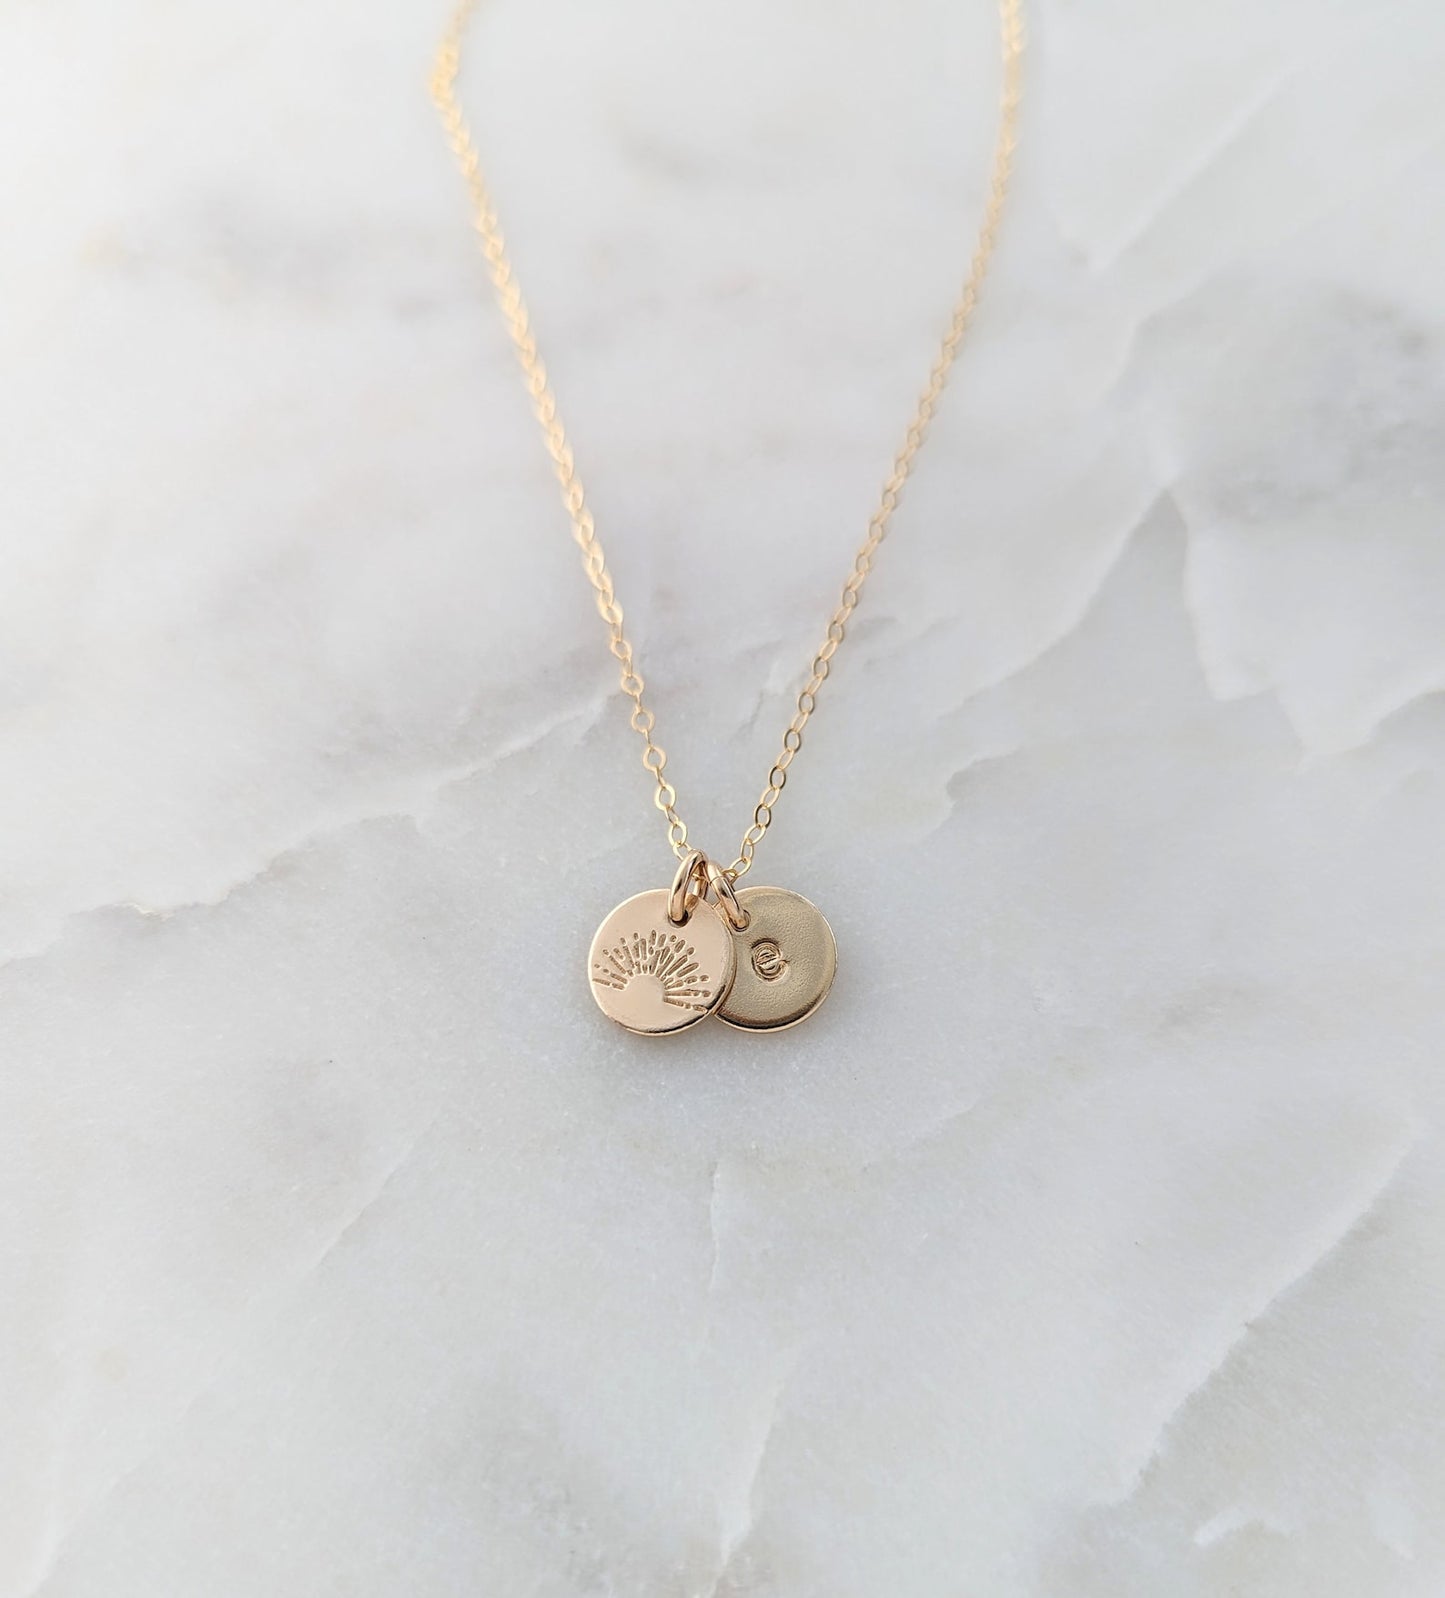 Sunshine Initial Necklace, Personalized Initial Disc, Dainty Gold Necklace